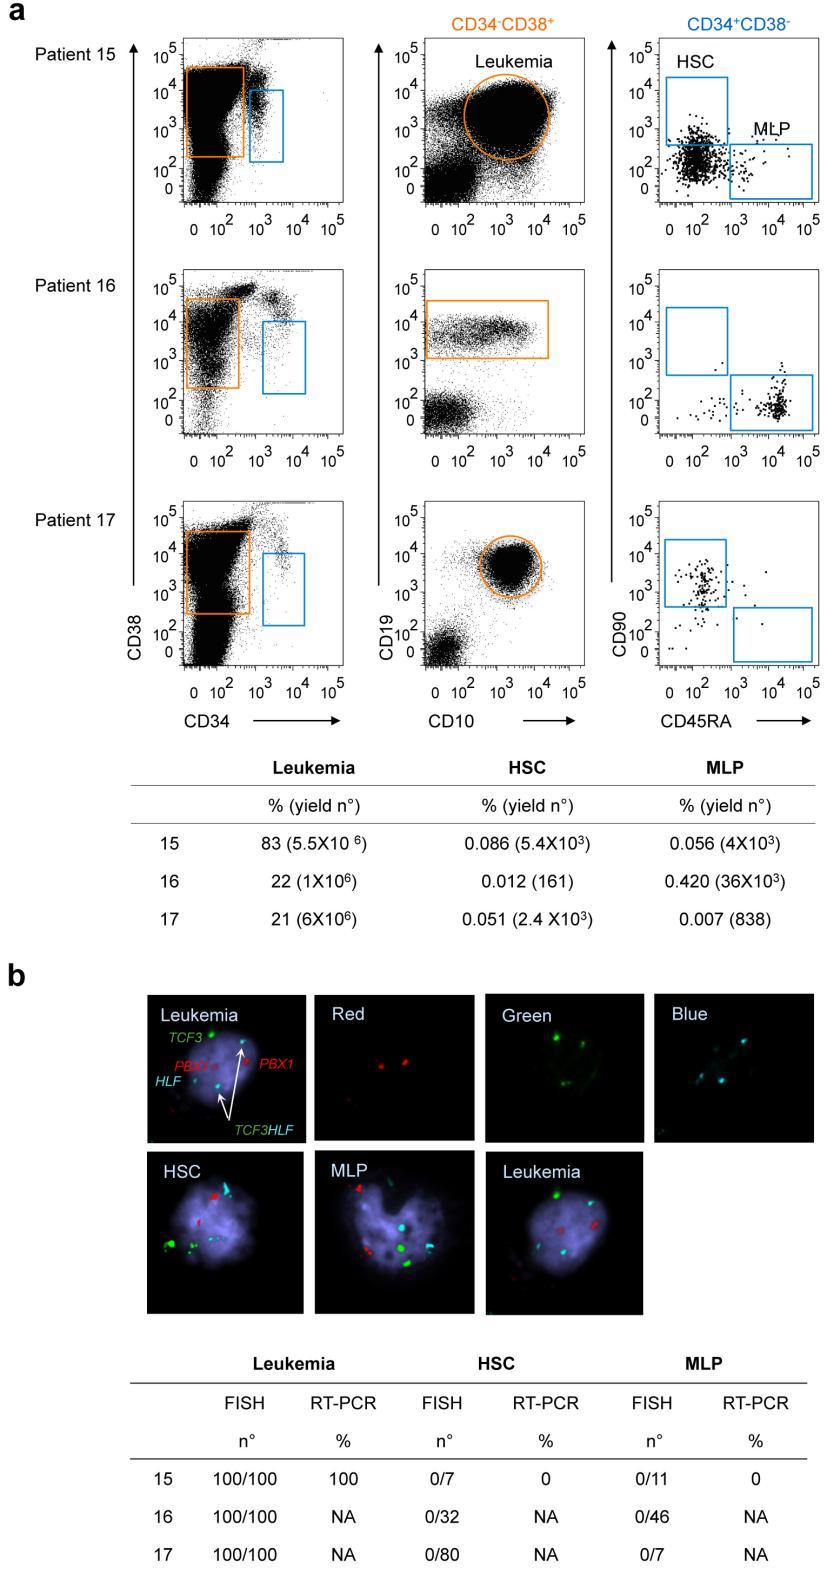 Supplementary Figure 2 The TCF3-HLF translocation is only detected in the lymphoid progenitor gate.